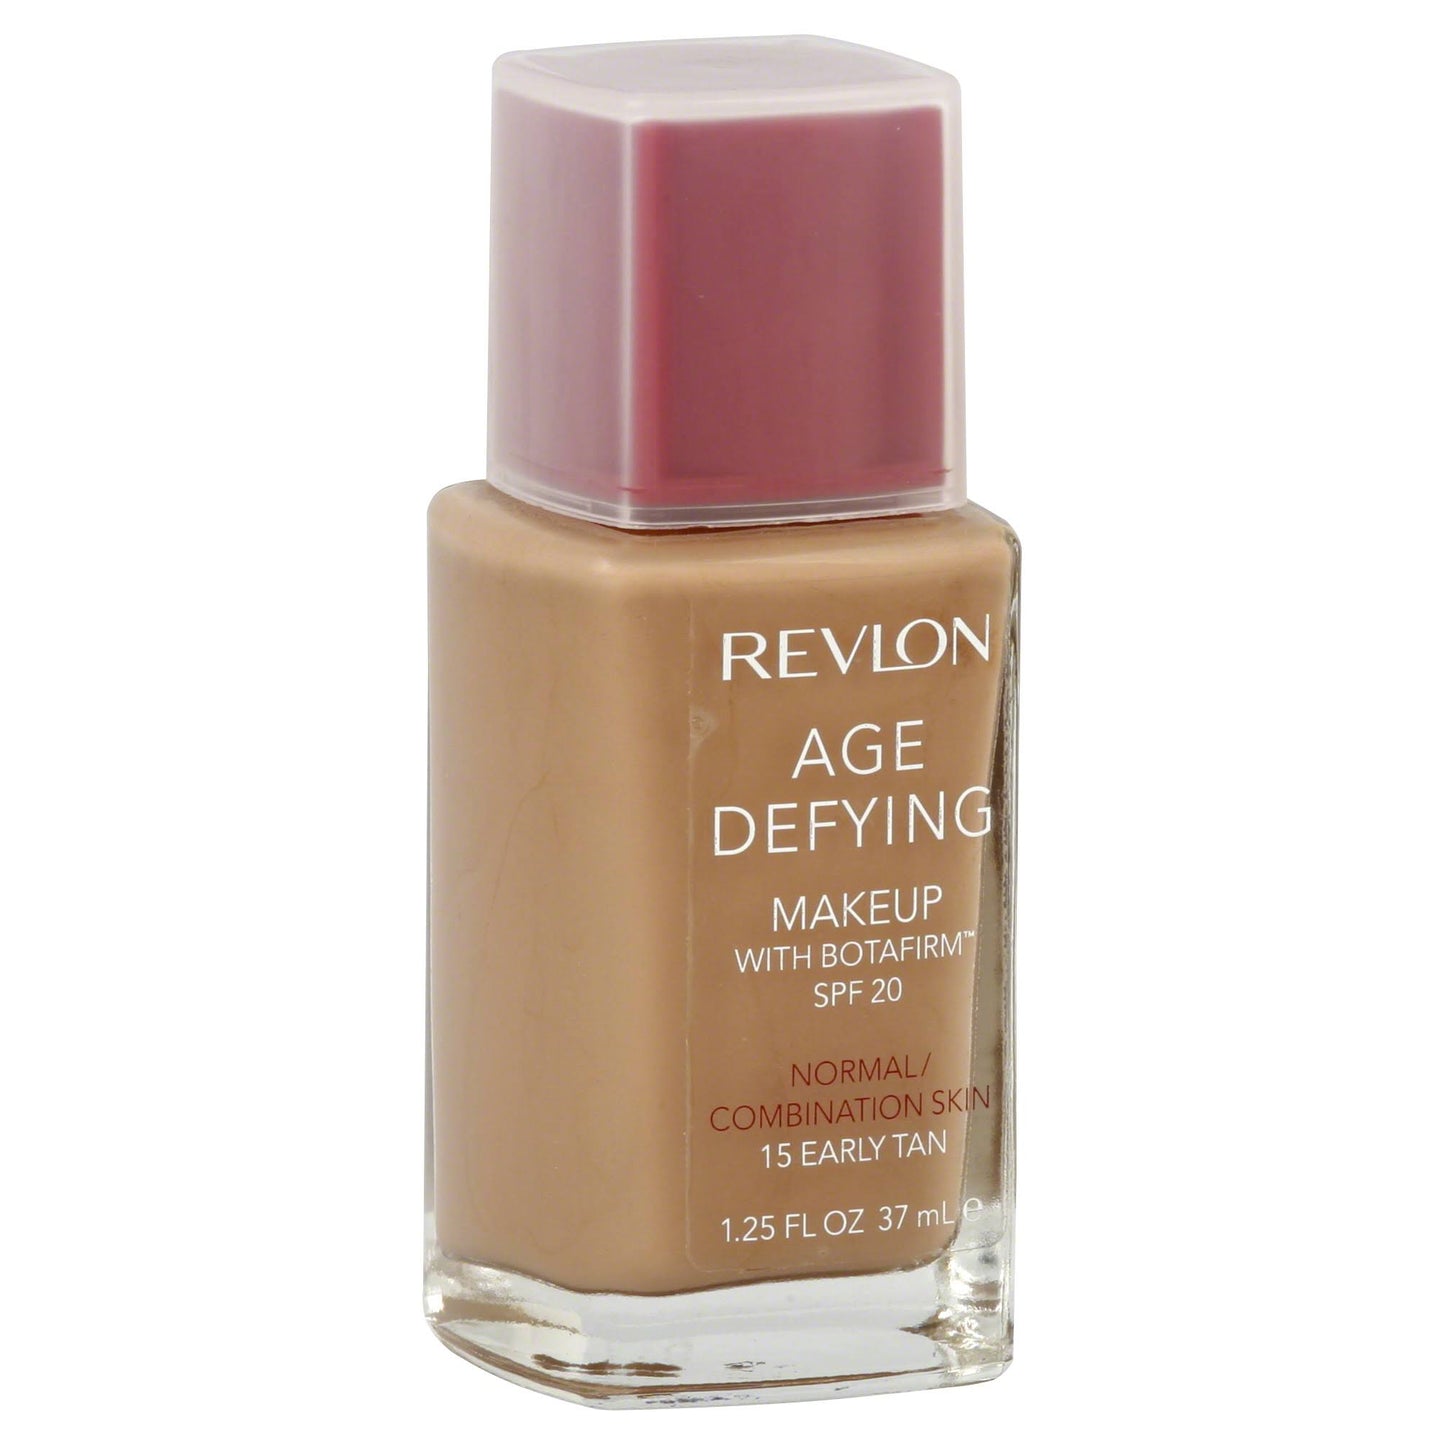 REVLON Age Defying Makeup with Botafirm, SPF 20, Normal/Combination Skin, Early Tan 15, 1.25-Ounce - ADDROS.COM